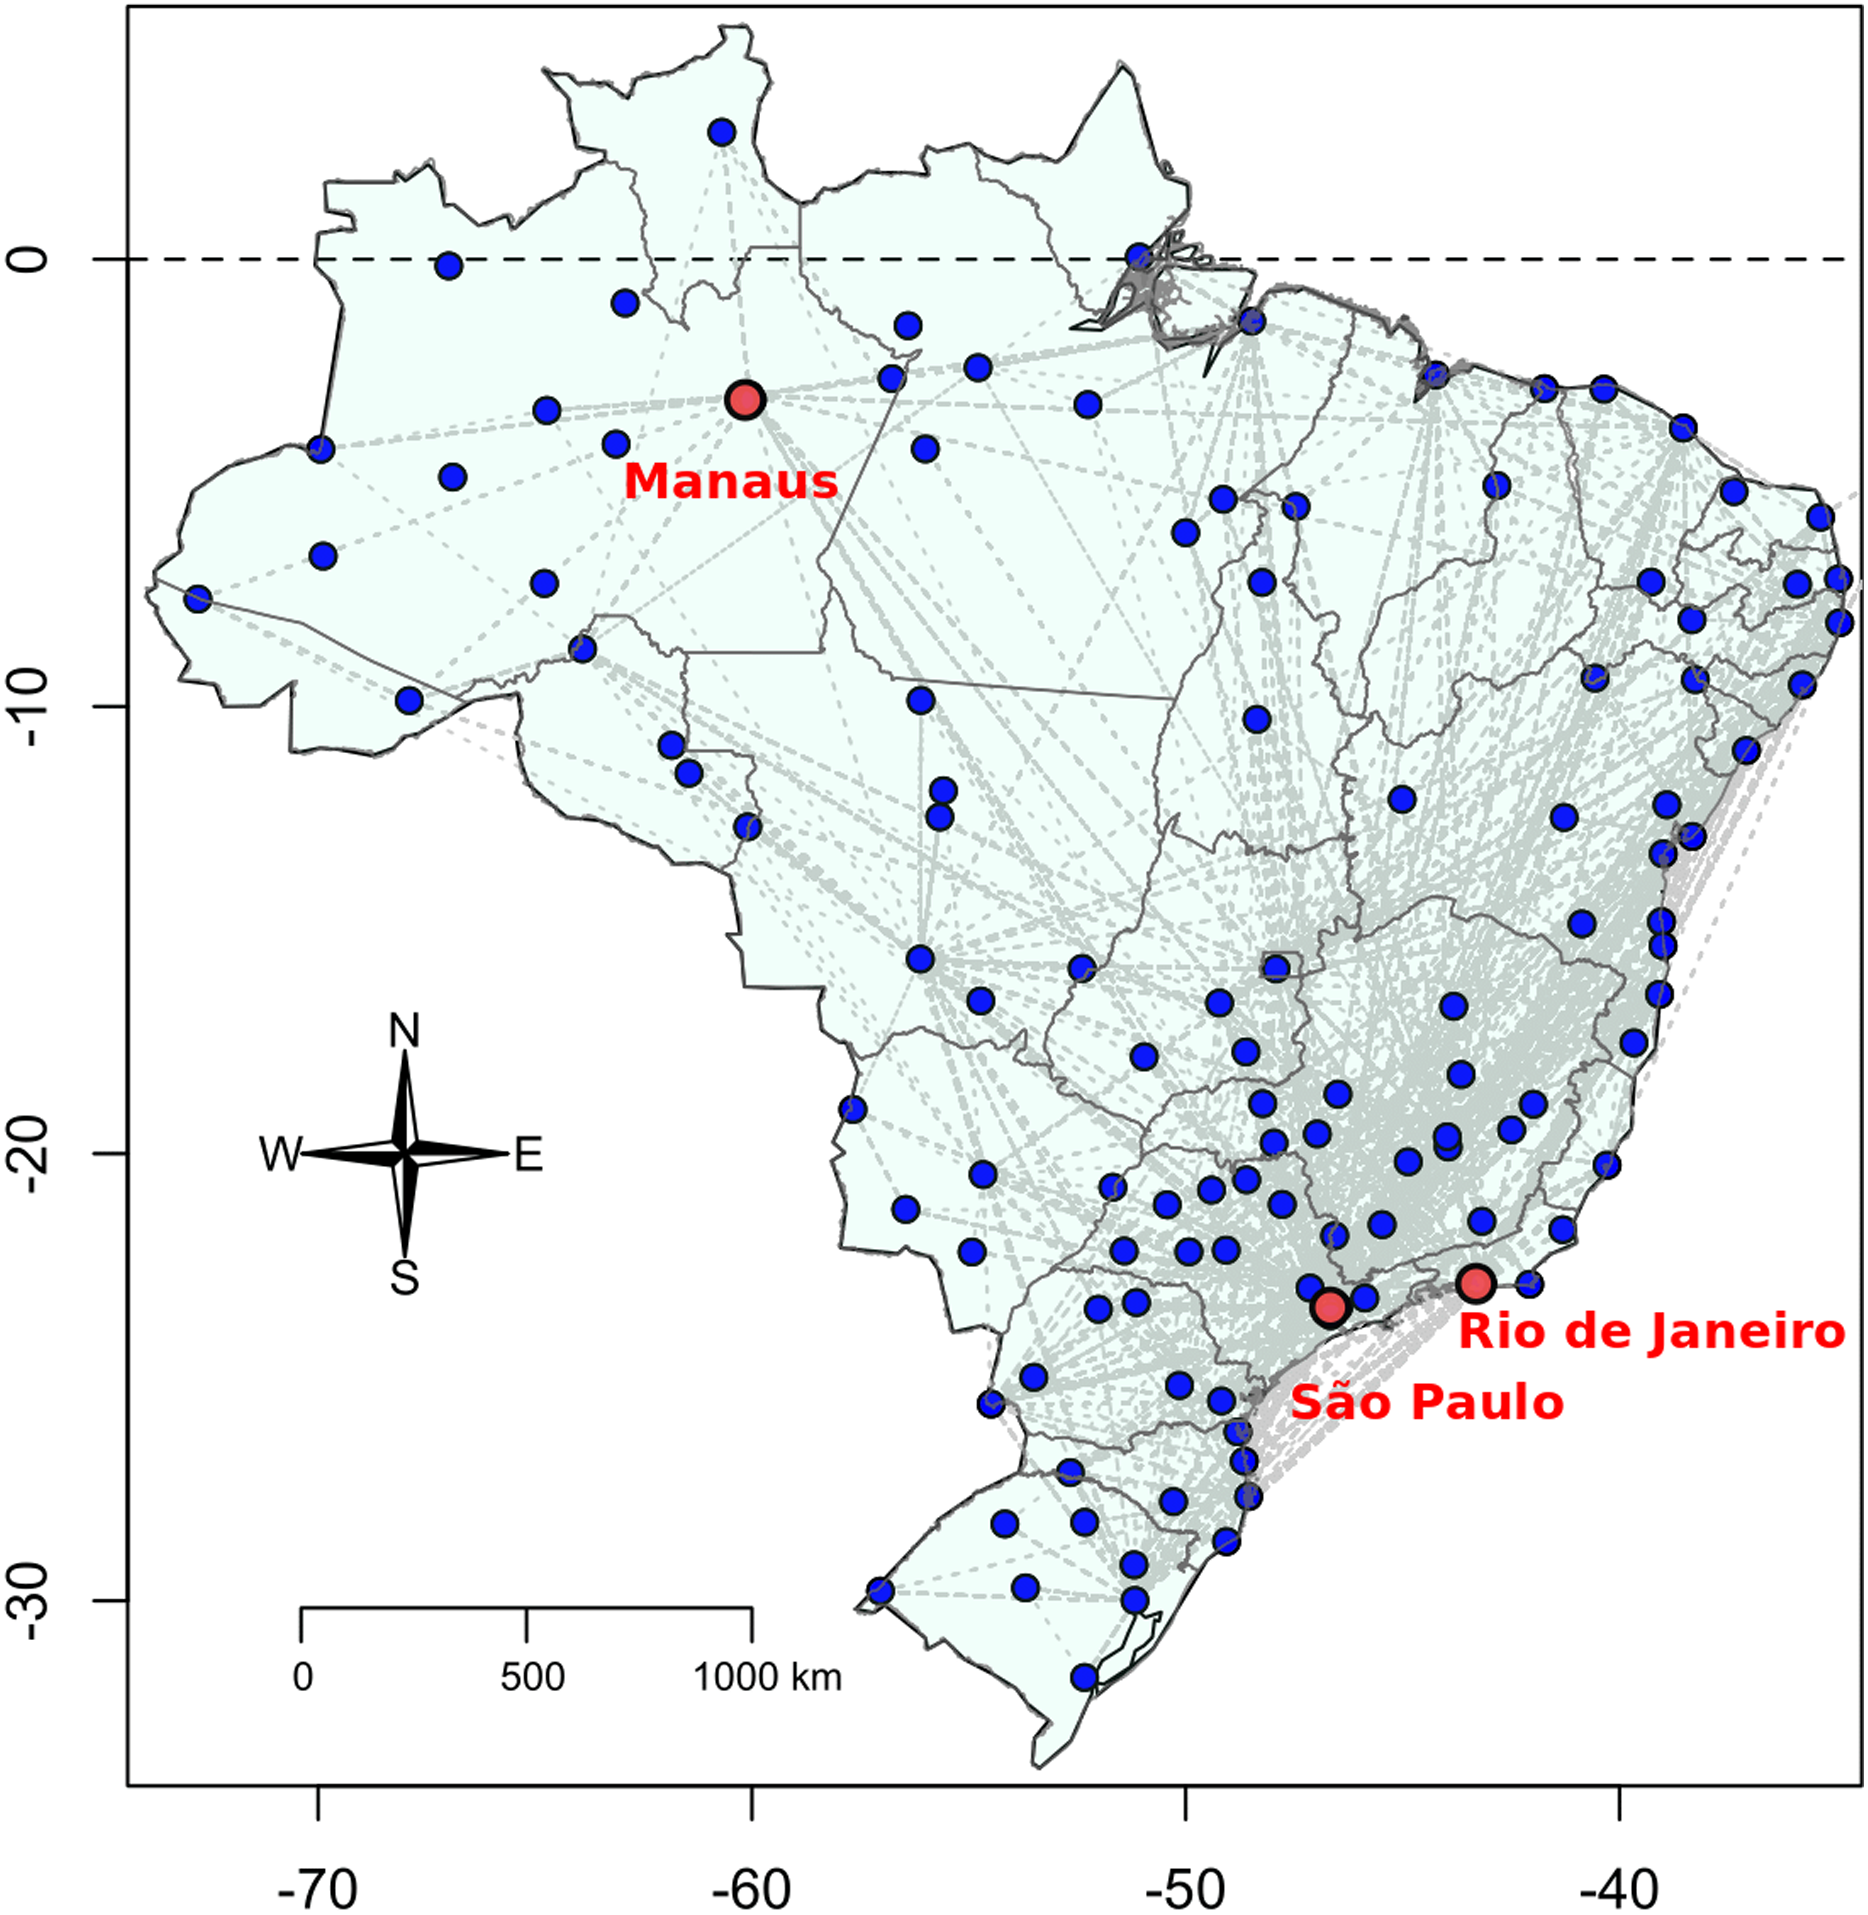 Brazil’s average daily flights fell from the original 2,500 to about 200 during the Covid-19 pandemic lockdown period. In the months with the highest surge of the pandemic, Brazilian airlines reduced their operations by 99%.